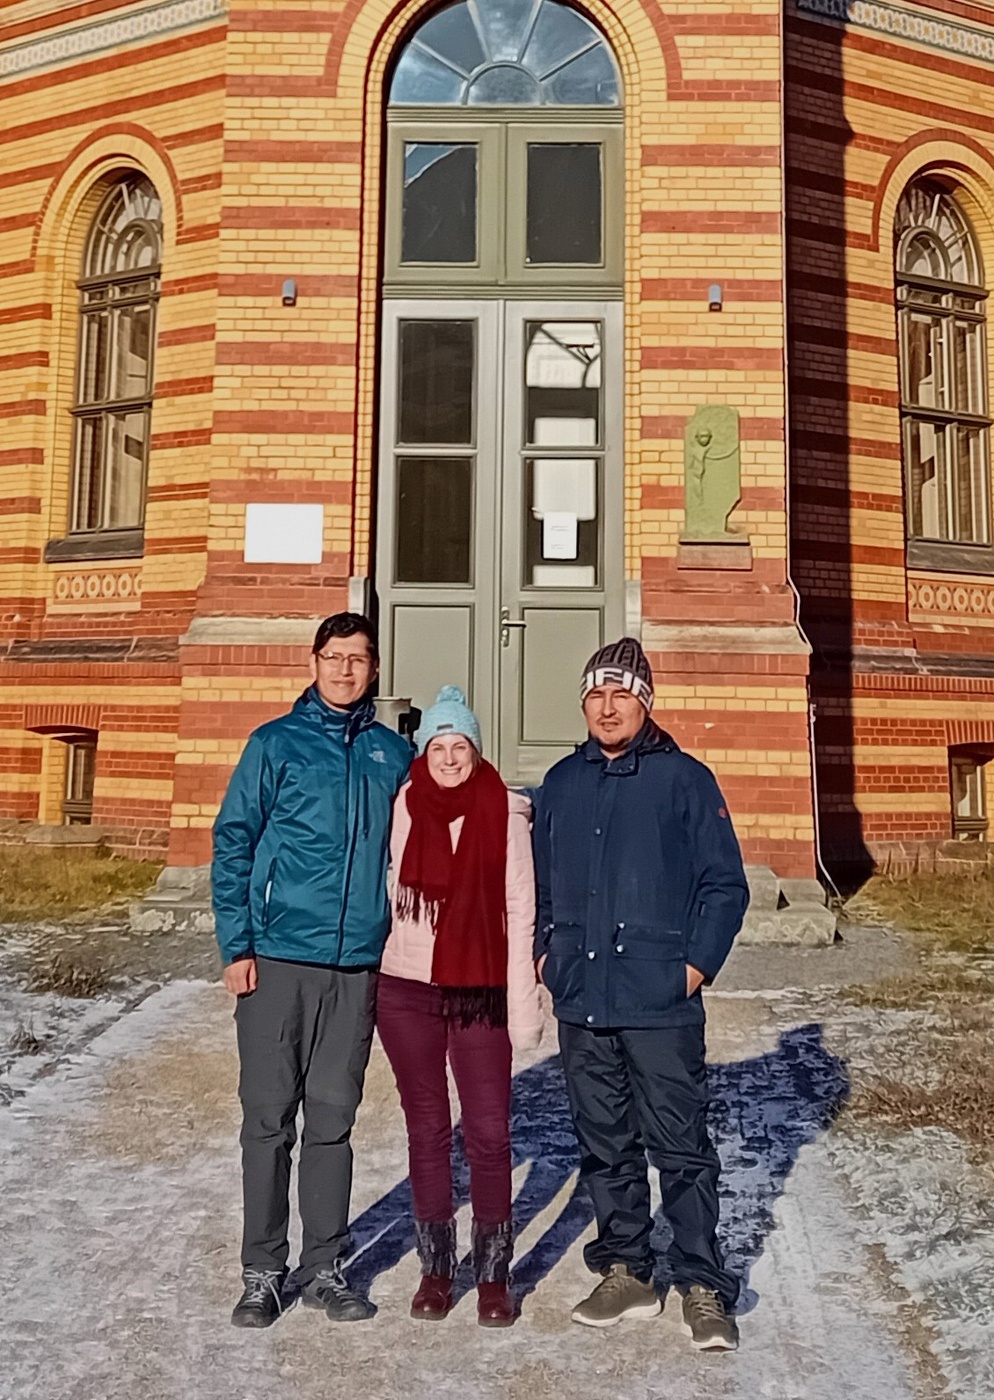 Bolivian Guest Researcher from Brazil joins B-EPICC's Hydrology Team